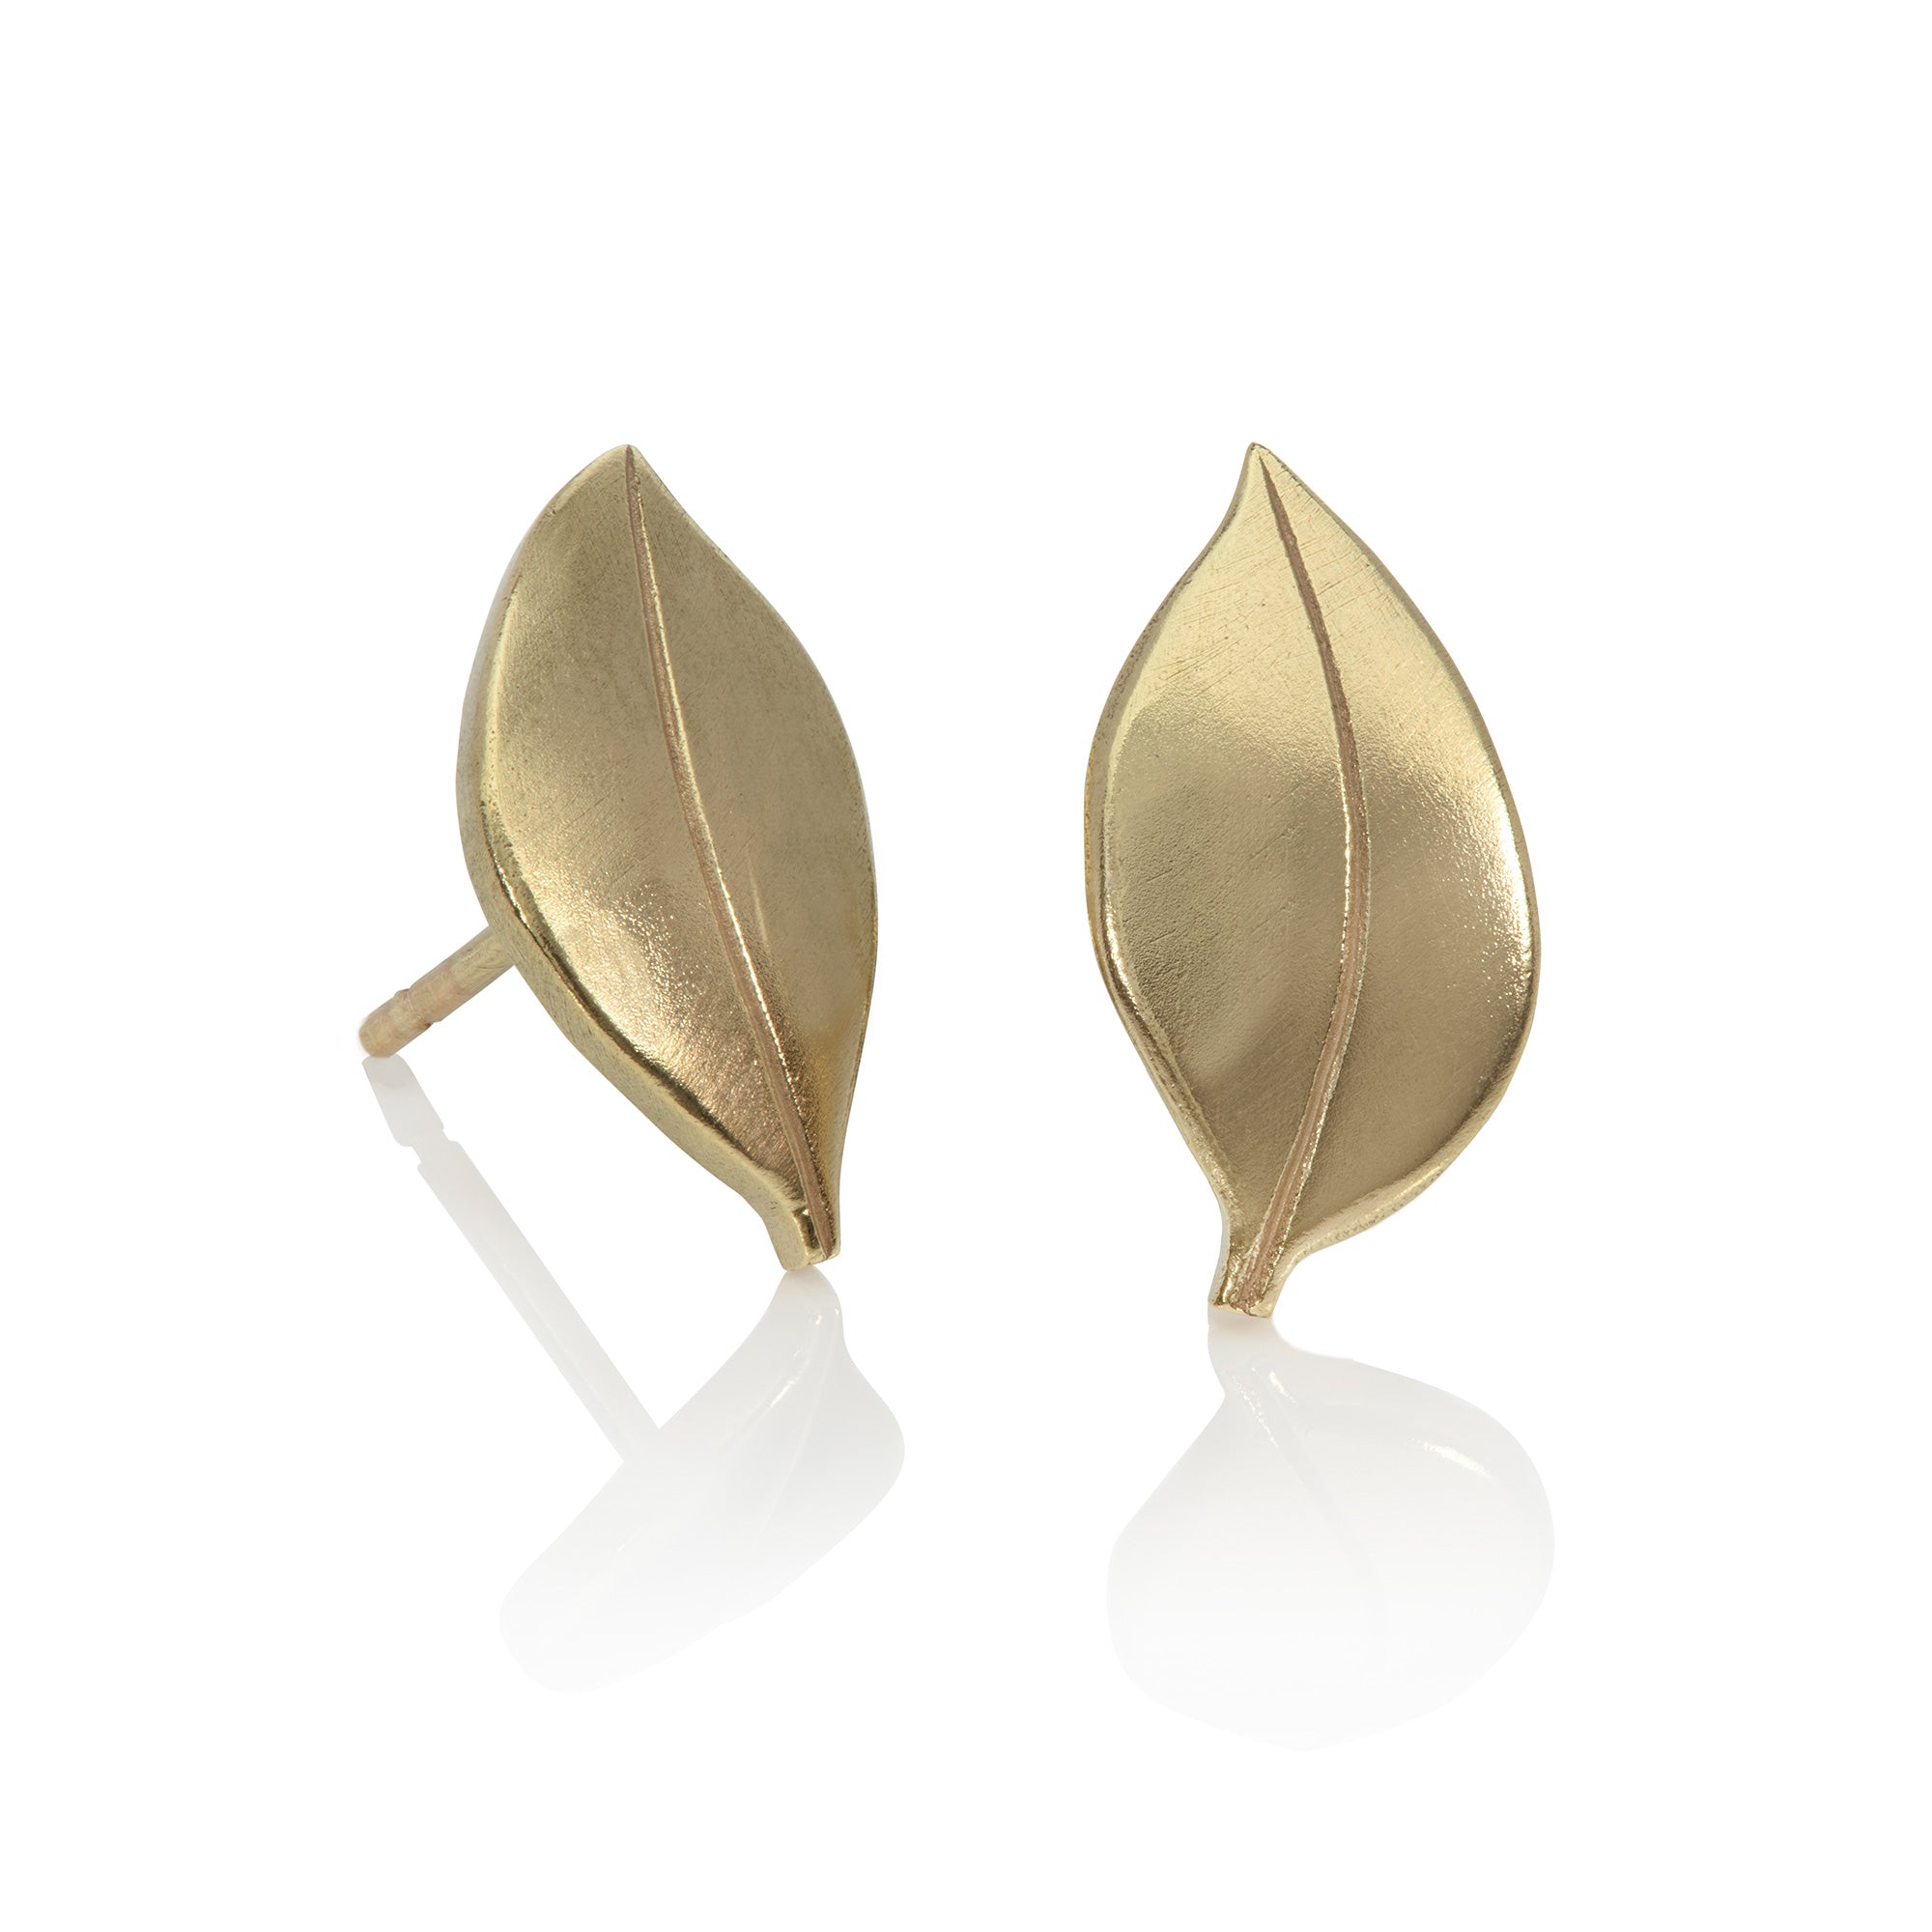 Leaf earrings in 18ct yellow gold pictured on white background